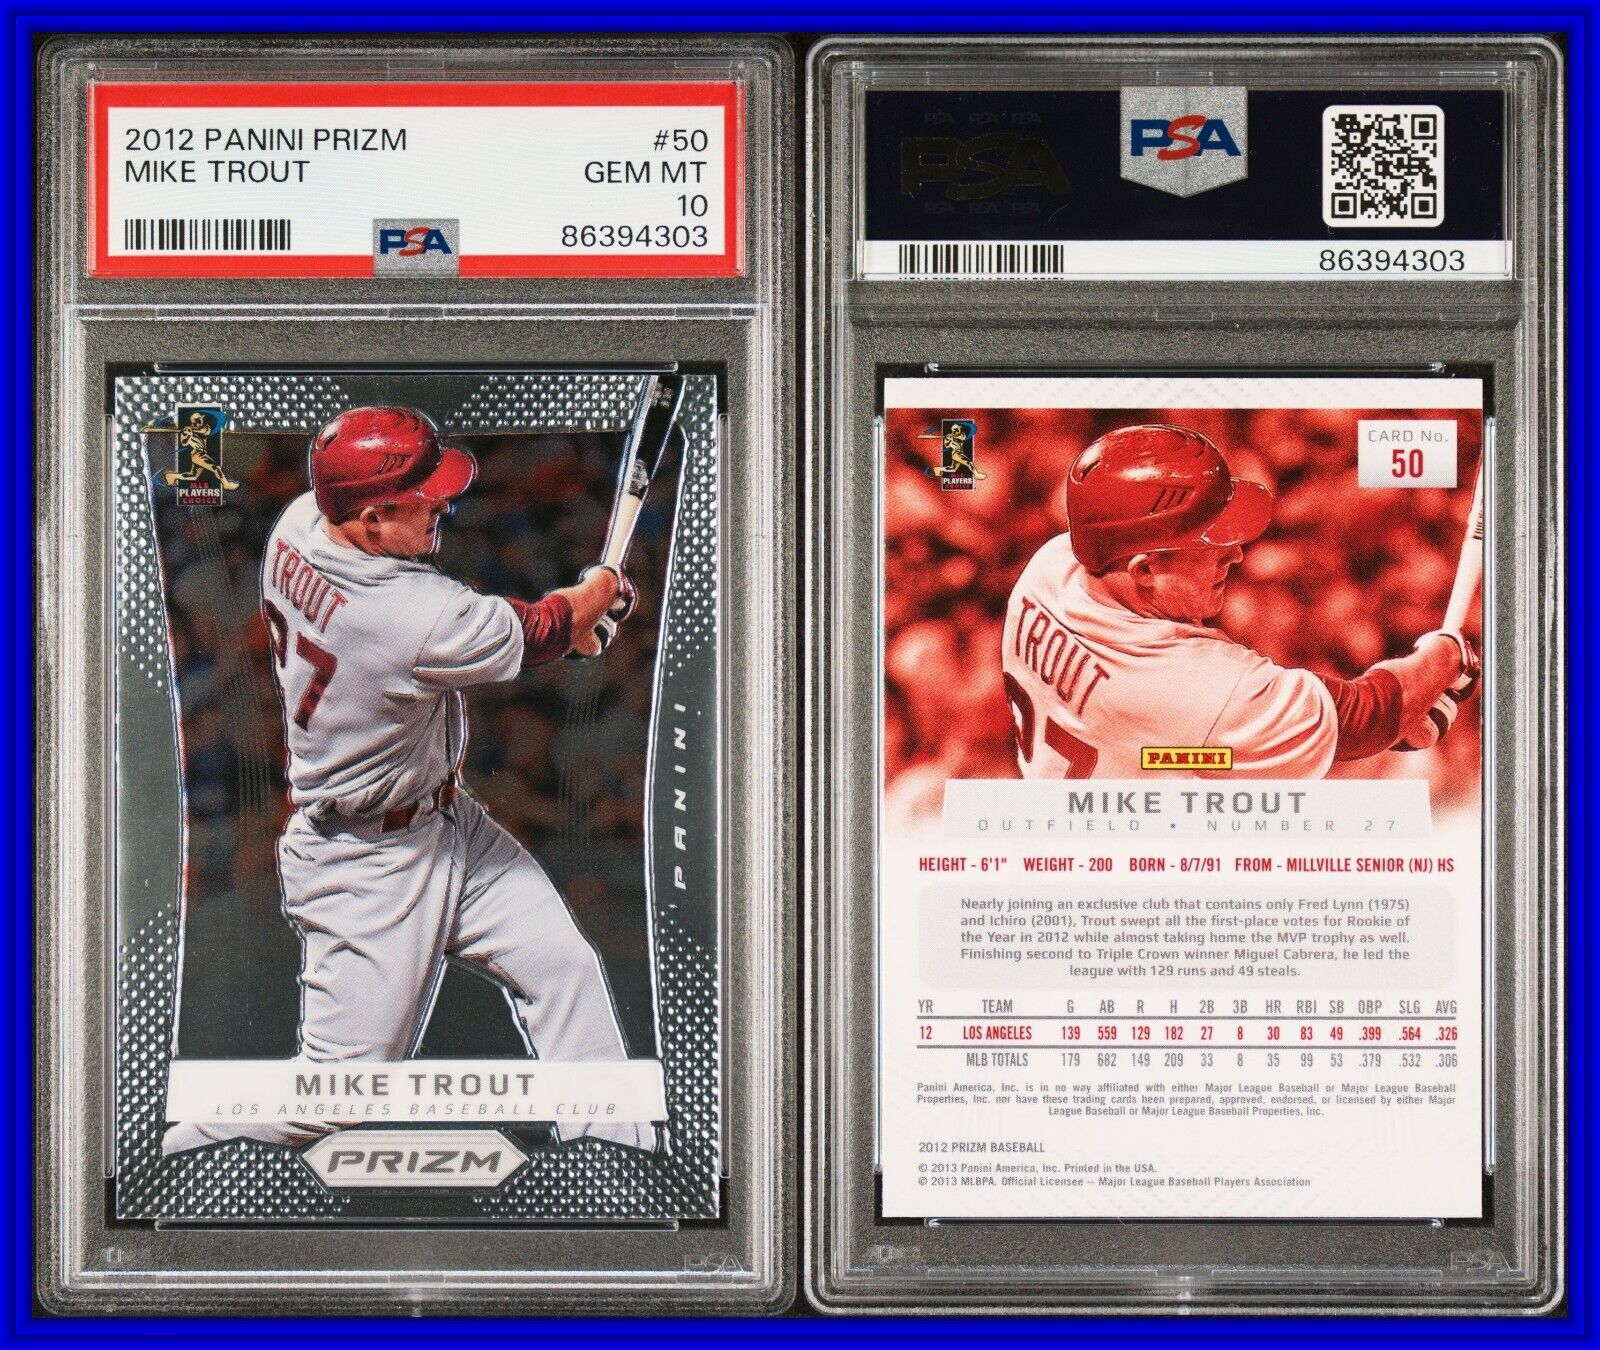 PSA 10 2012 Panini Prizm #50 Mike Trout Los Angeles Angels 1st Ever Prizm Card!